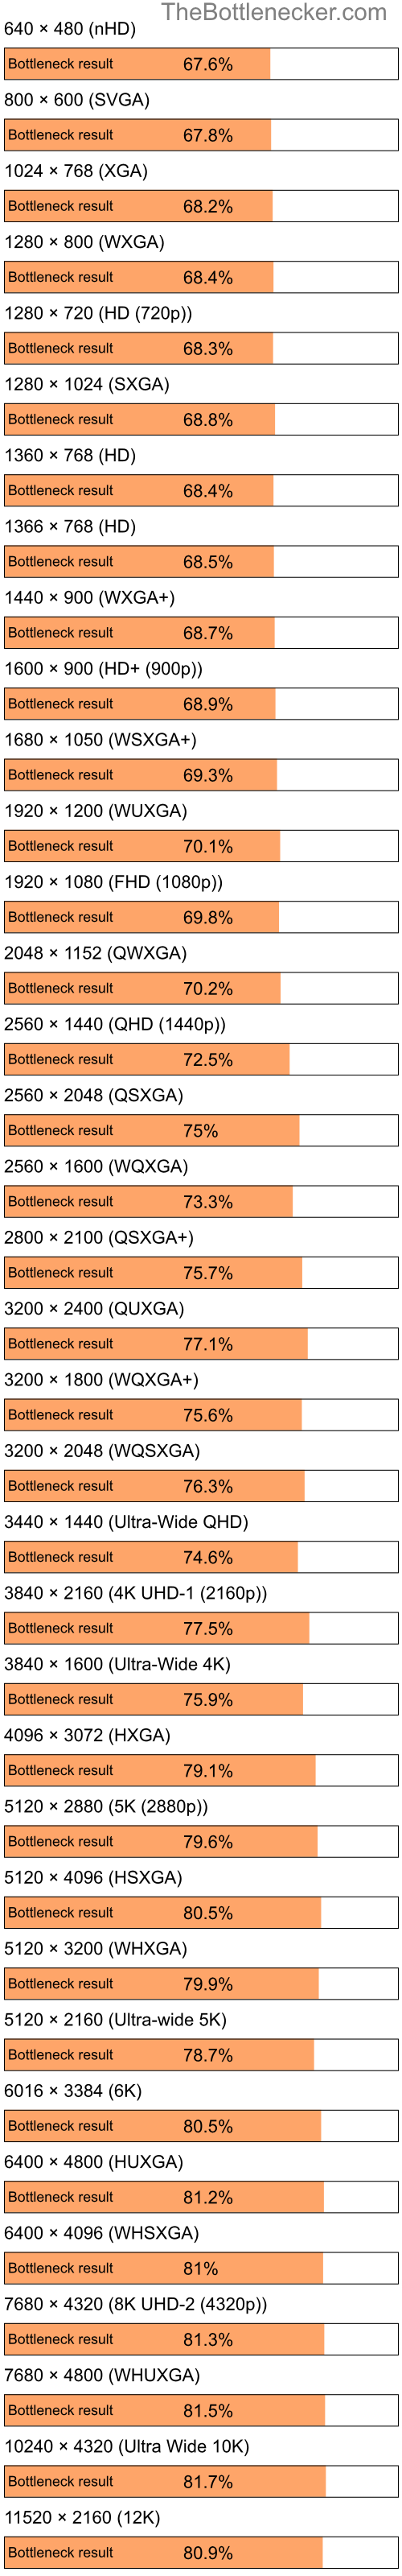 Bottleneck results by resolution for Intel Pentium 4 and AMD Mobility Radeon X1600 in Graphic Card Intense Tasks